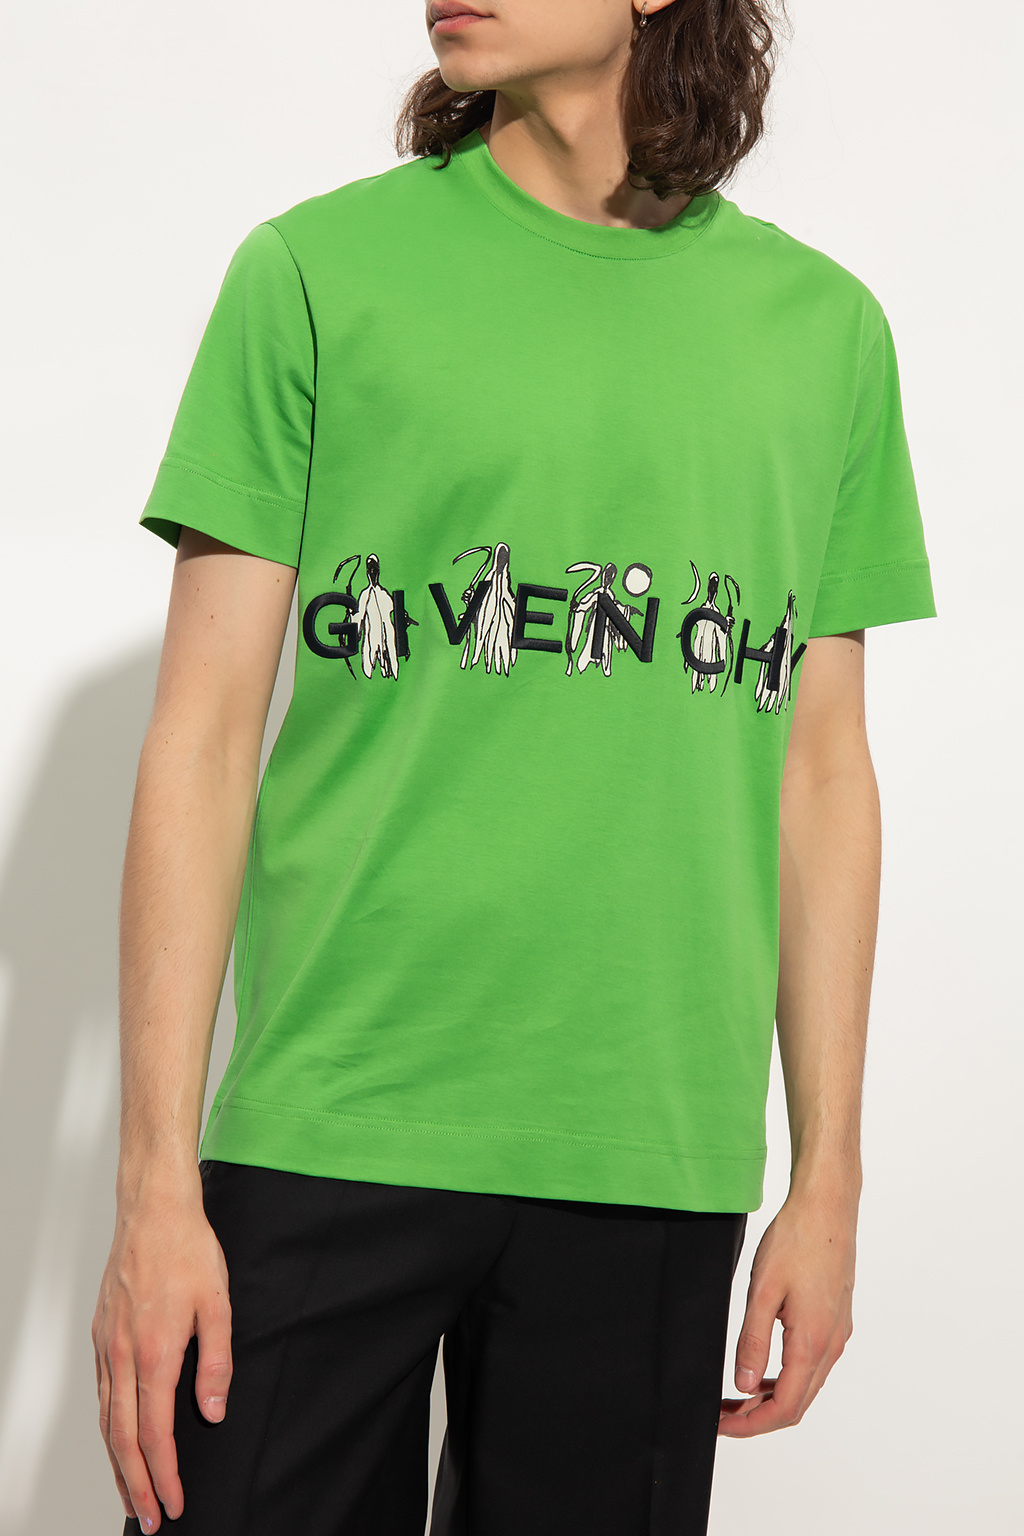 Givenchy Парфюм givenchy pour homme 100ml